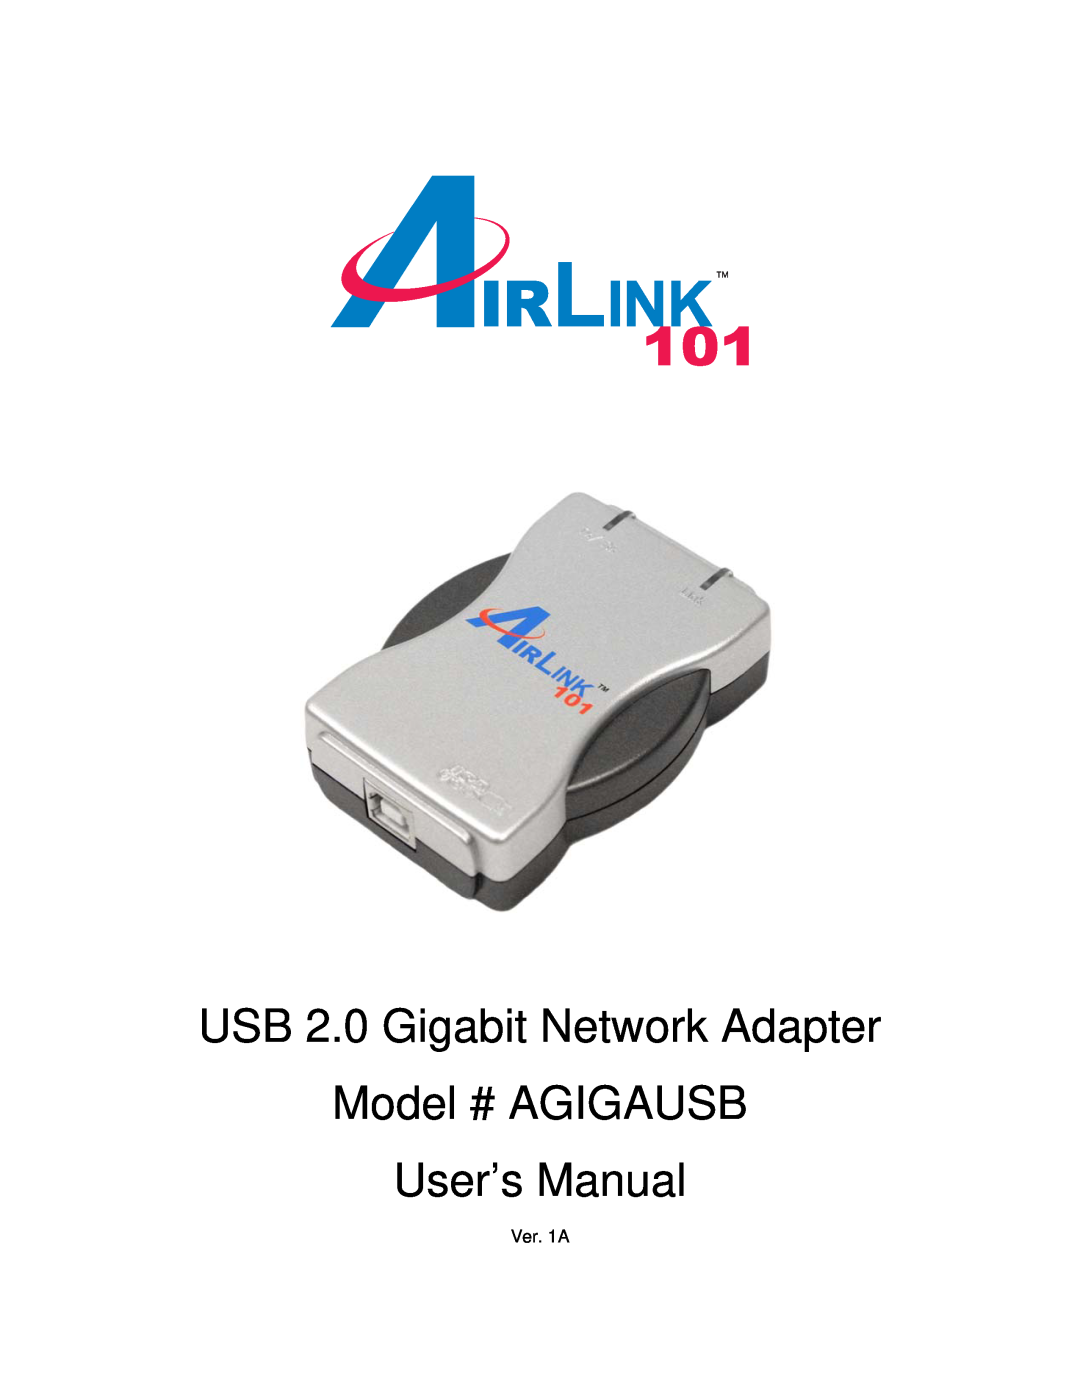 Airlink101 AGIGAUSB manual Section, Package Contents, Quick Installation Guide, USB 2.0 Gigabit Network Adapter 